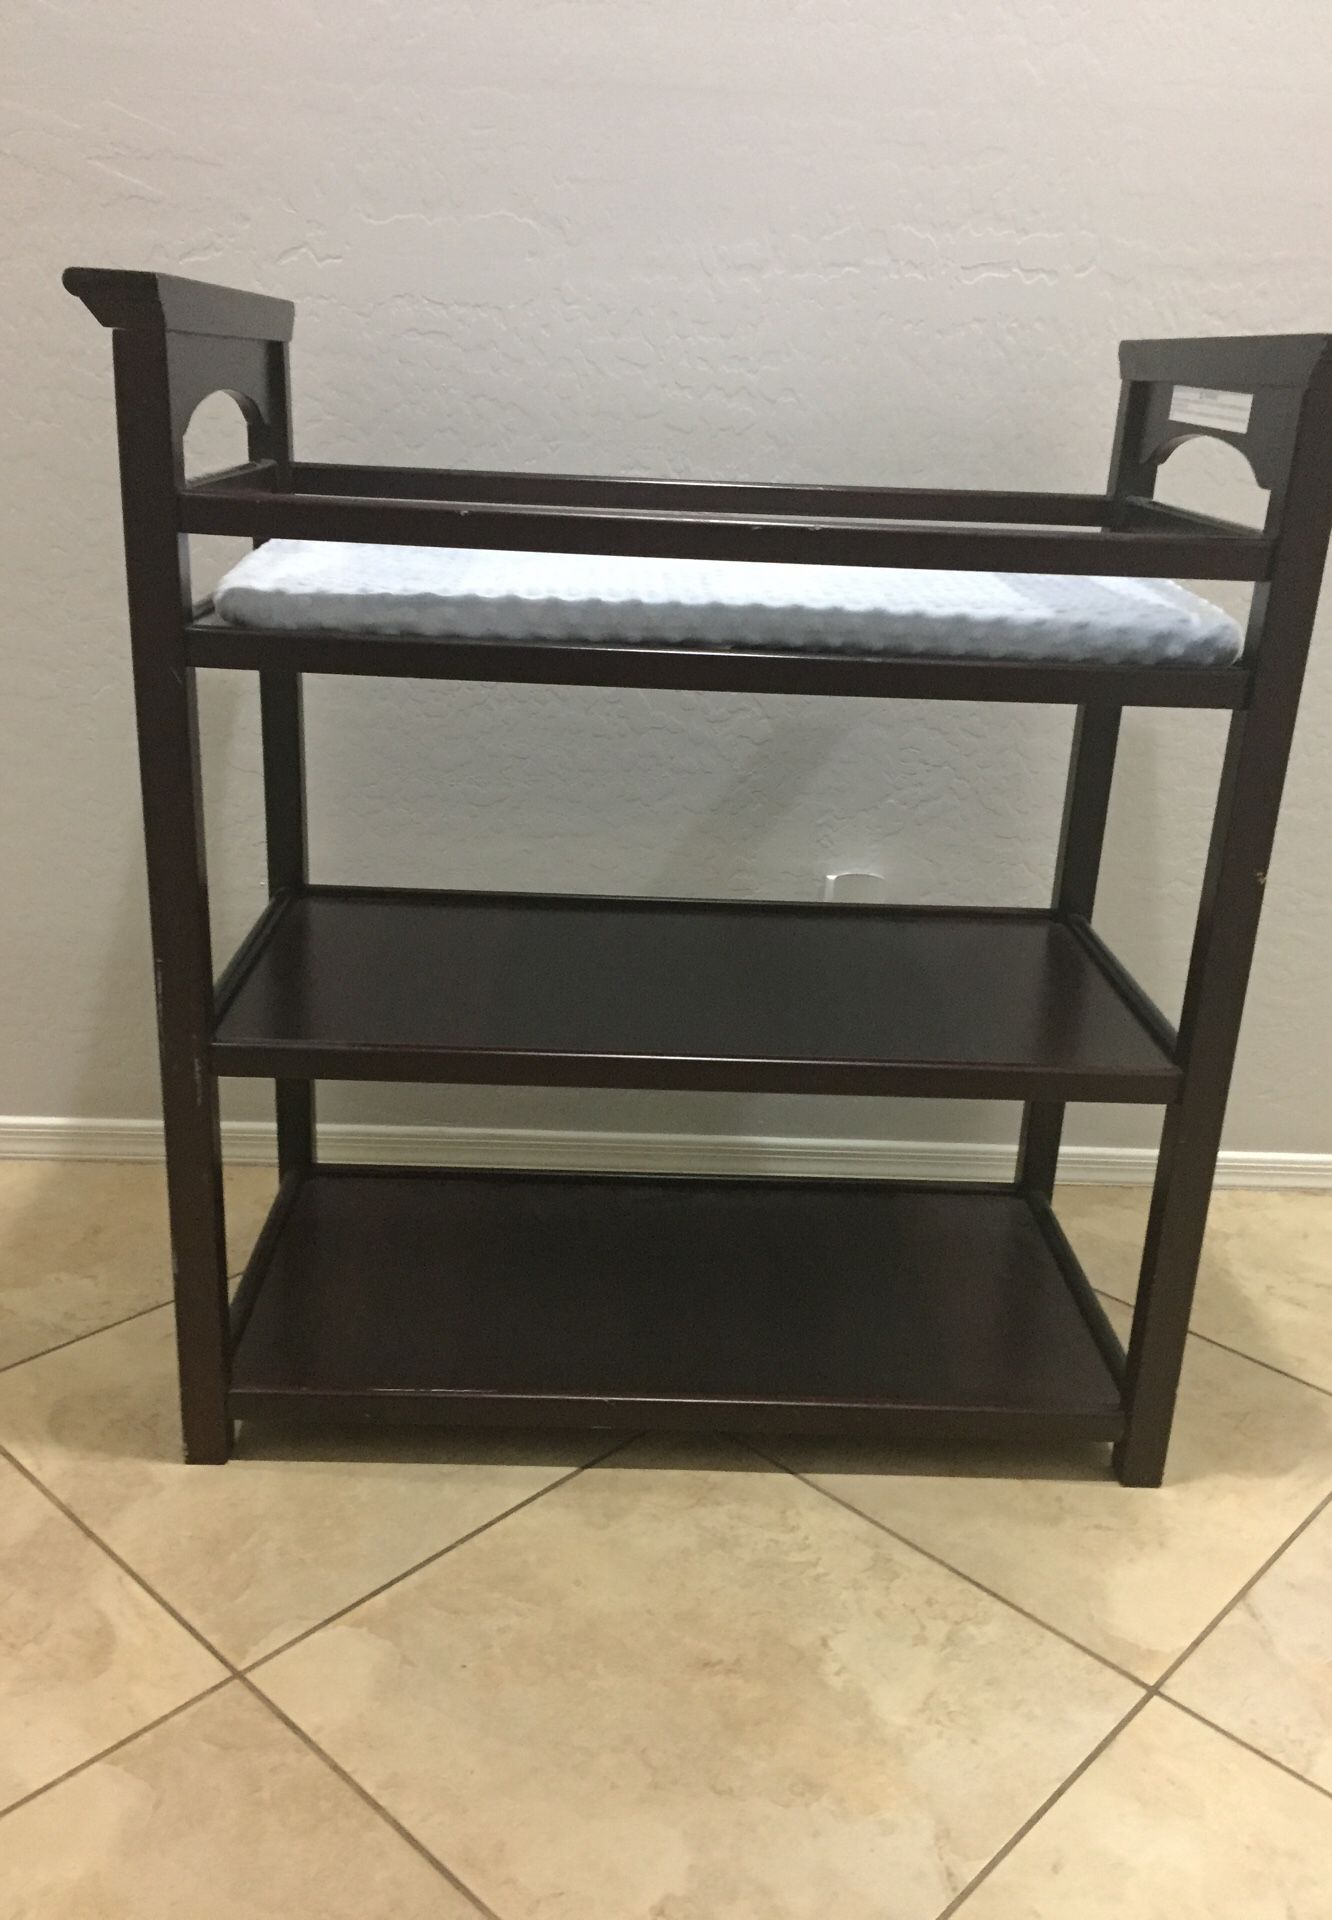 Baby changing table-Graco